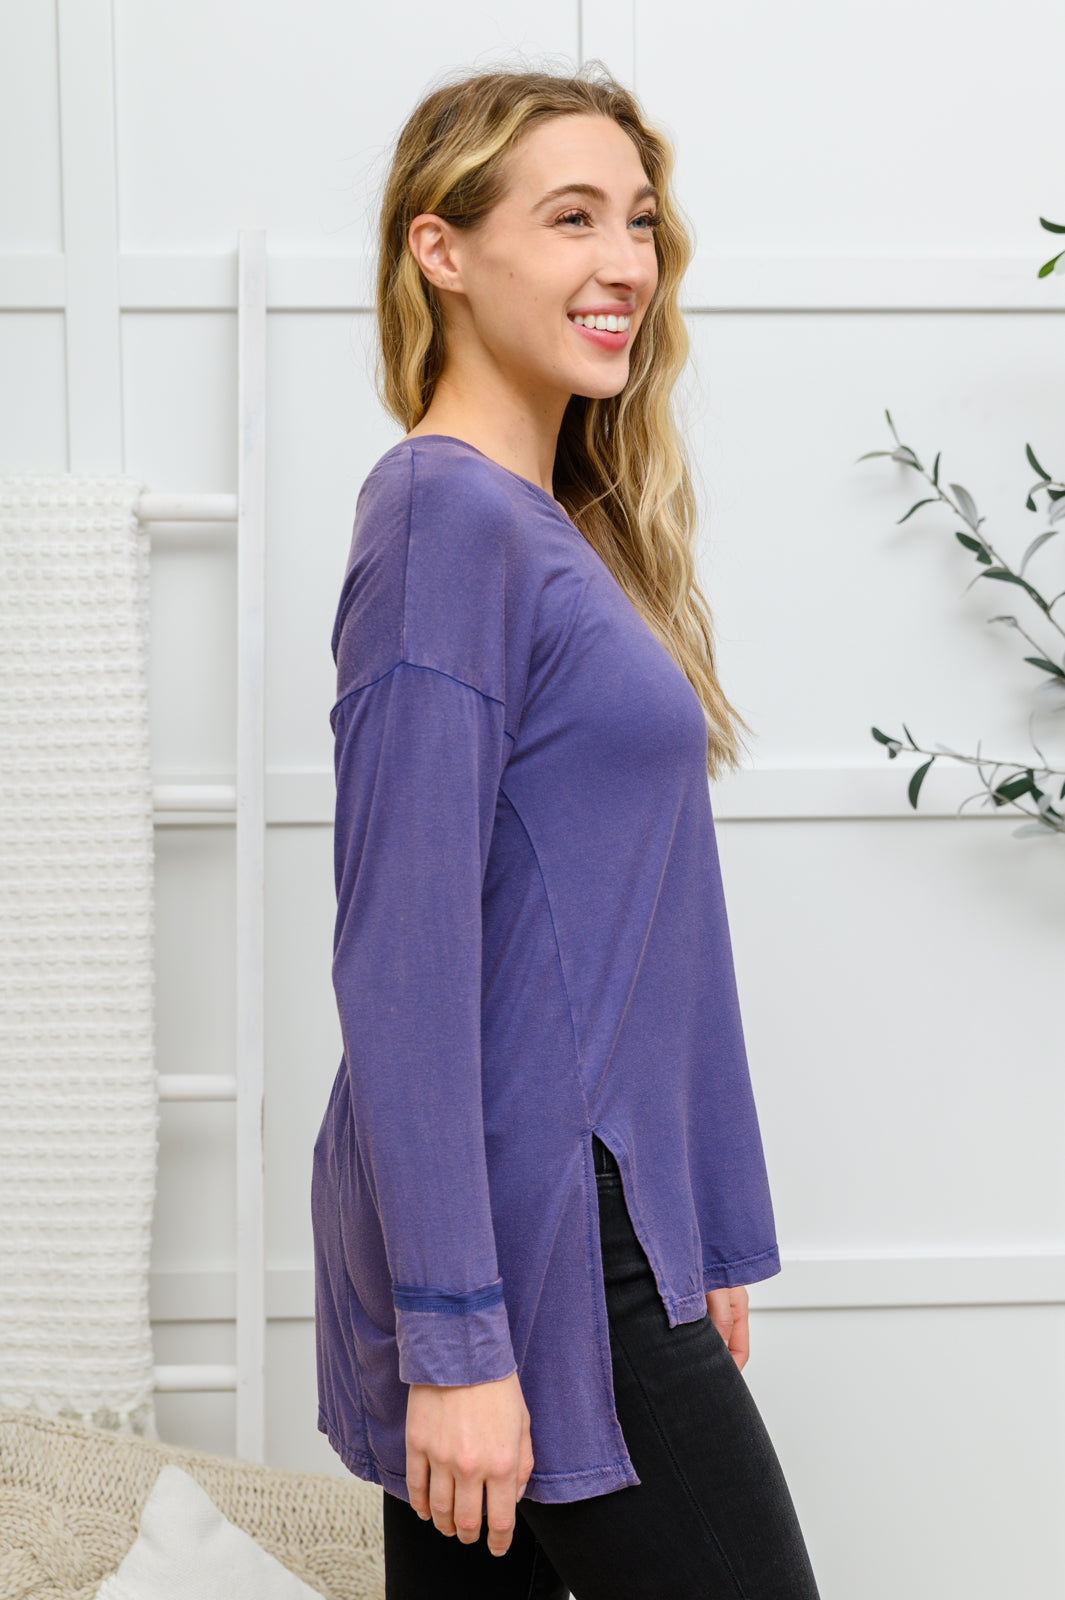 Long Sleeve Knit Top With Pocket In Denim Blue - The GlamBox Jewels Boutique